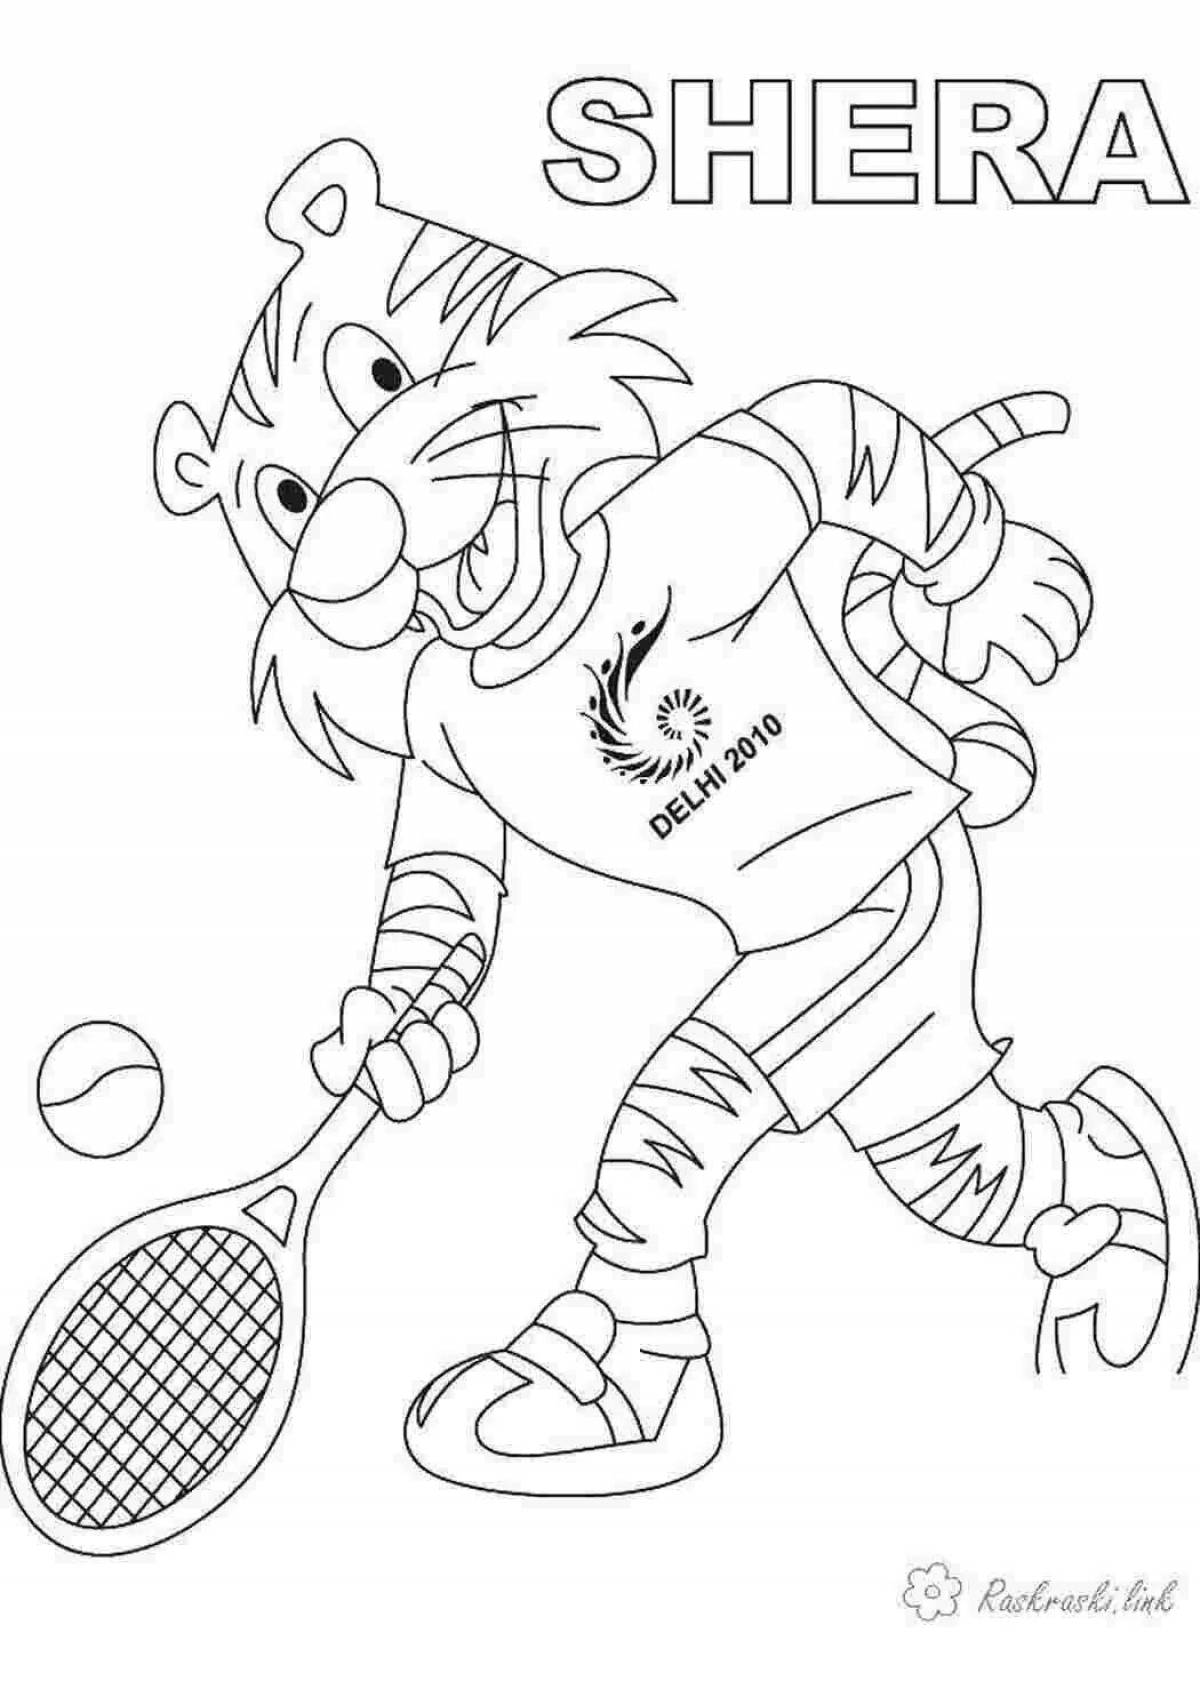 Color-frenzy sport games coloring page